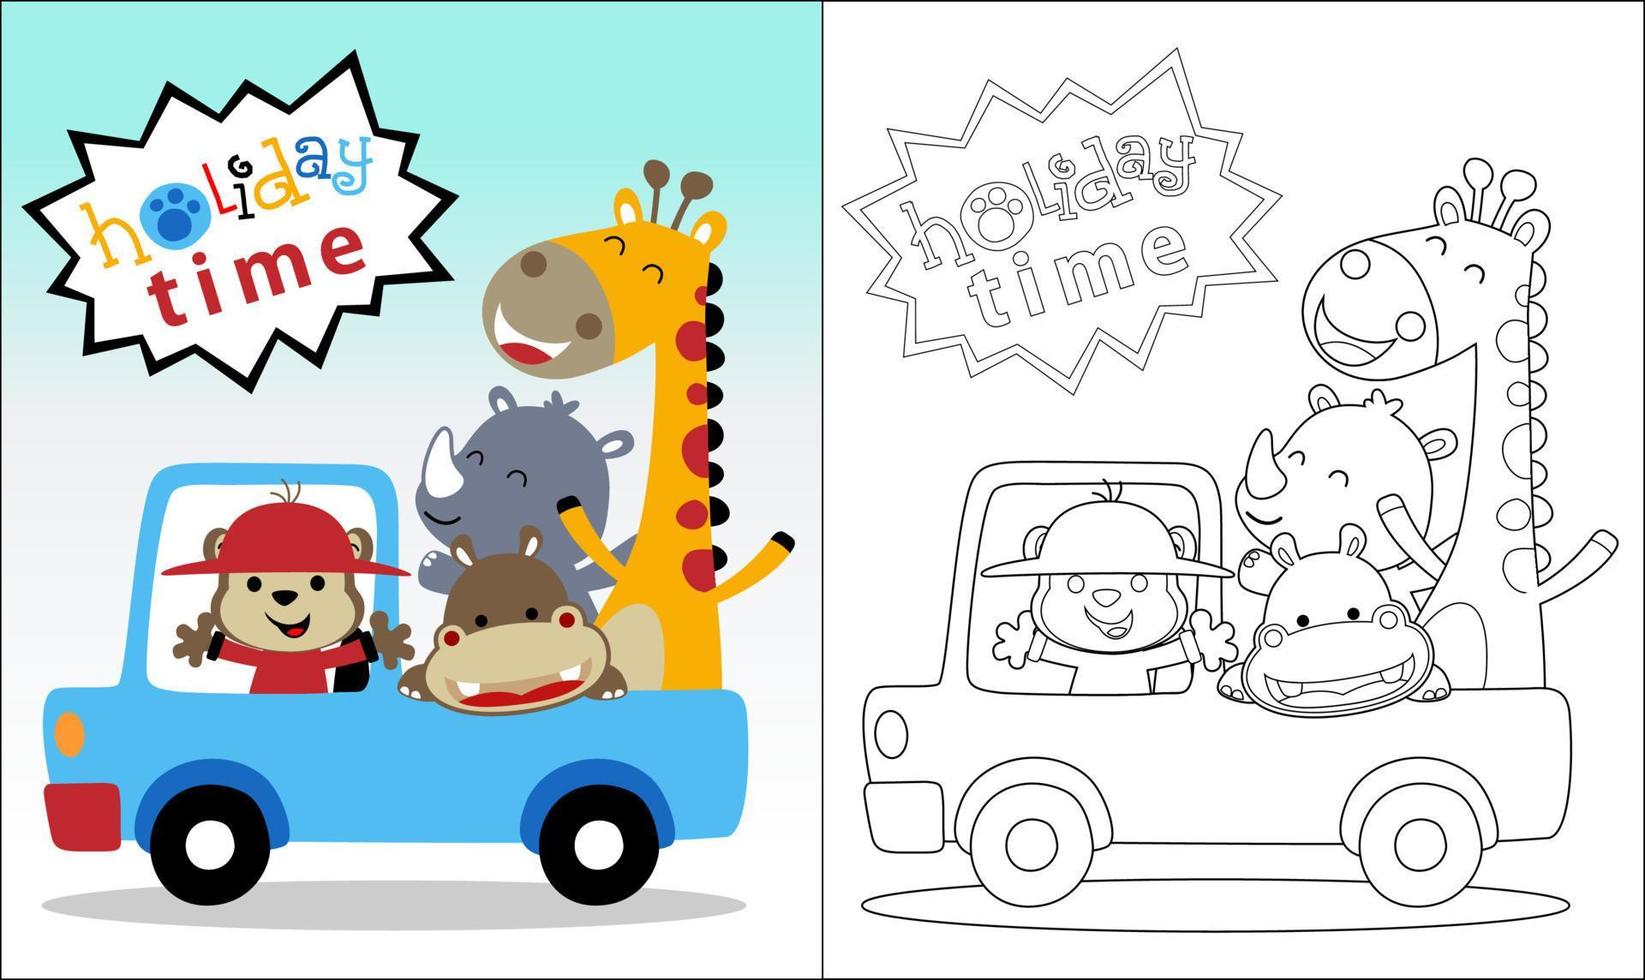 Group of funny animals cartoon on vehicle, coloring book or page vector